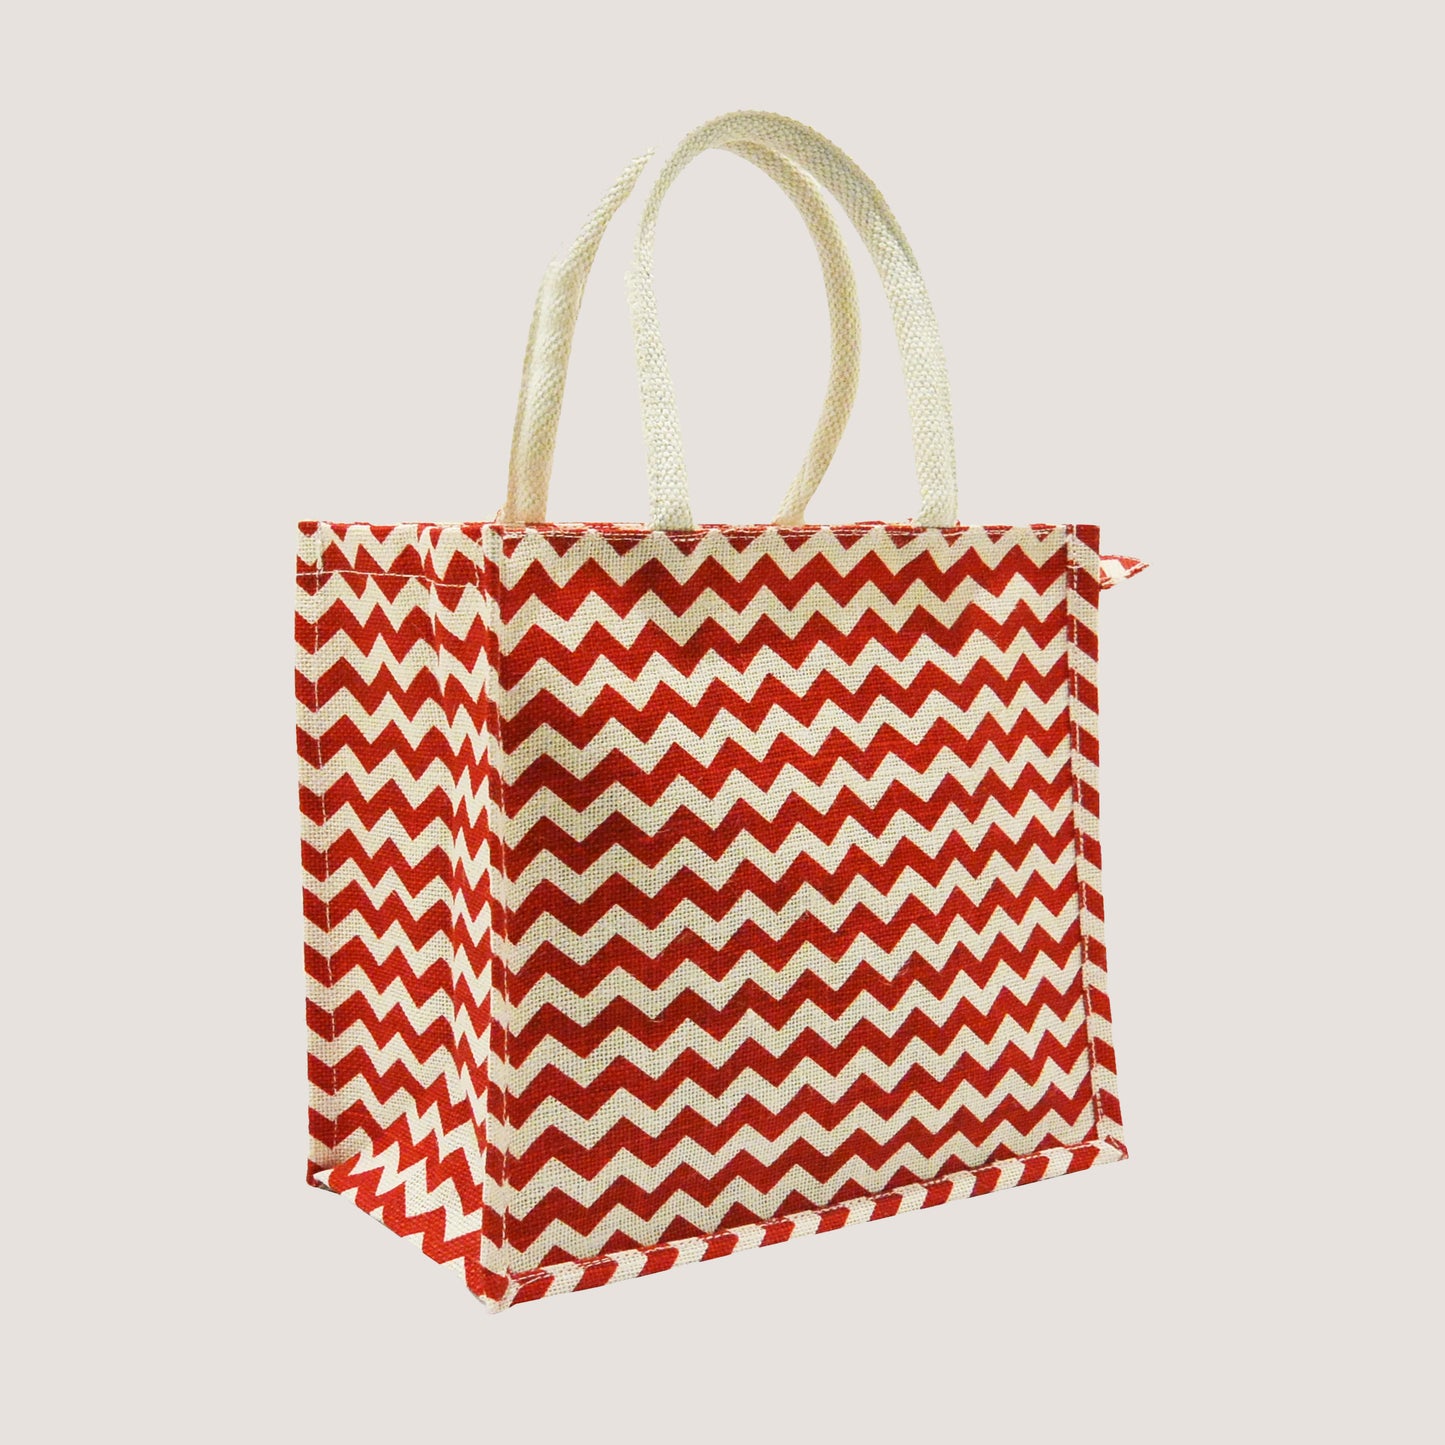 EARTHBAGS PRINTED JUTE LUNCH BAG WITH ZIPPER